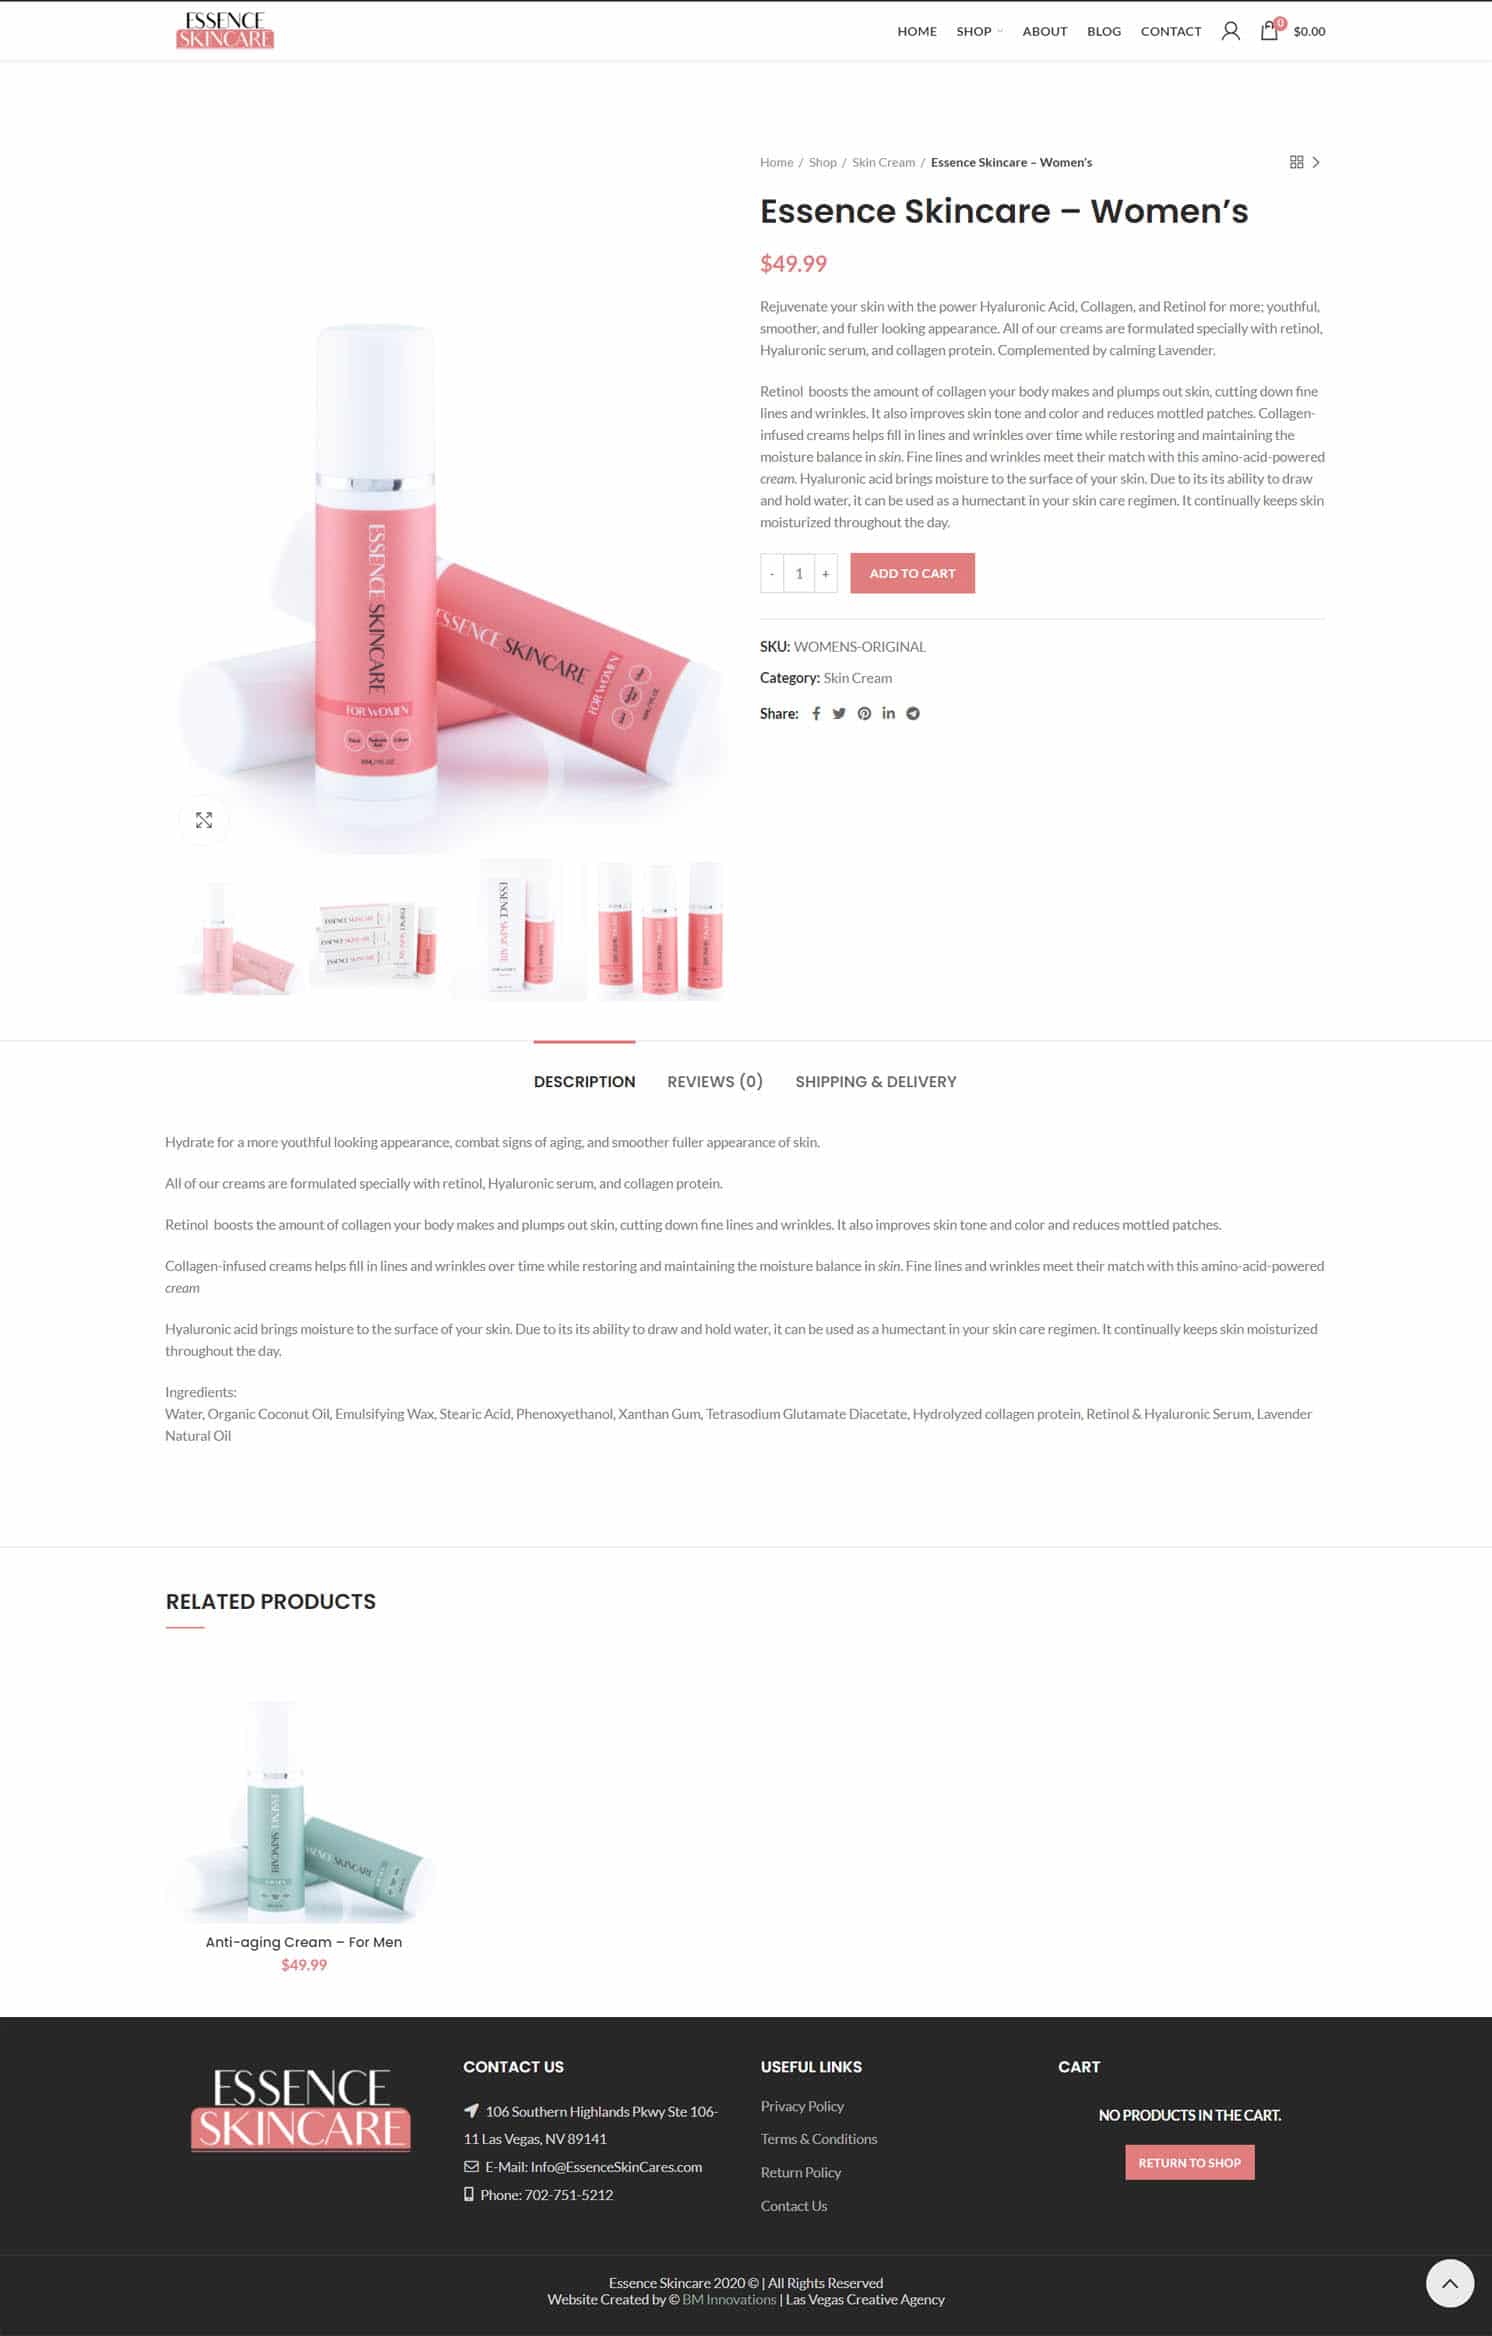 Essence Skincare Product Page